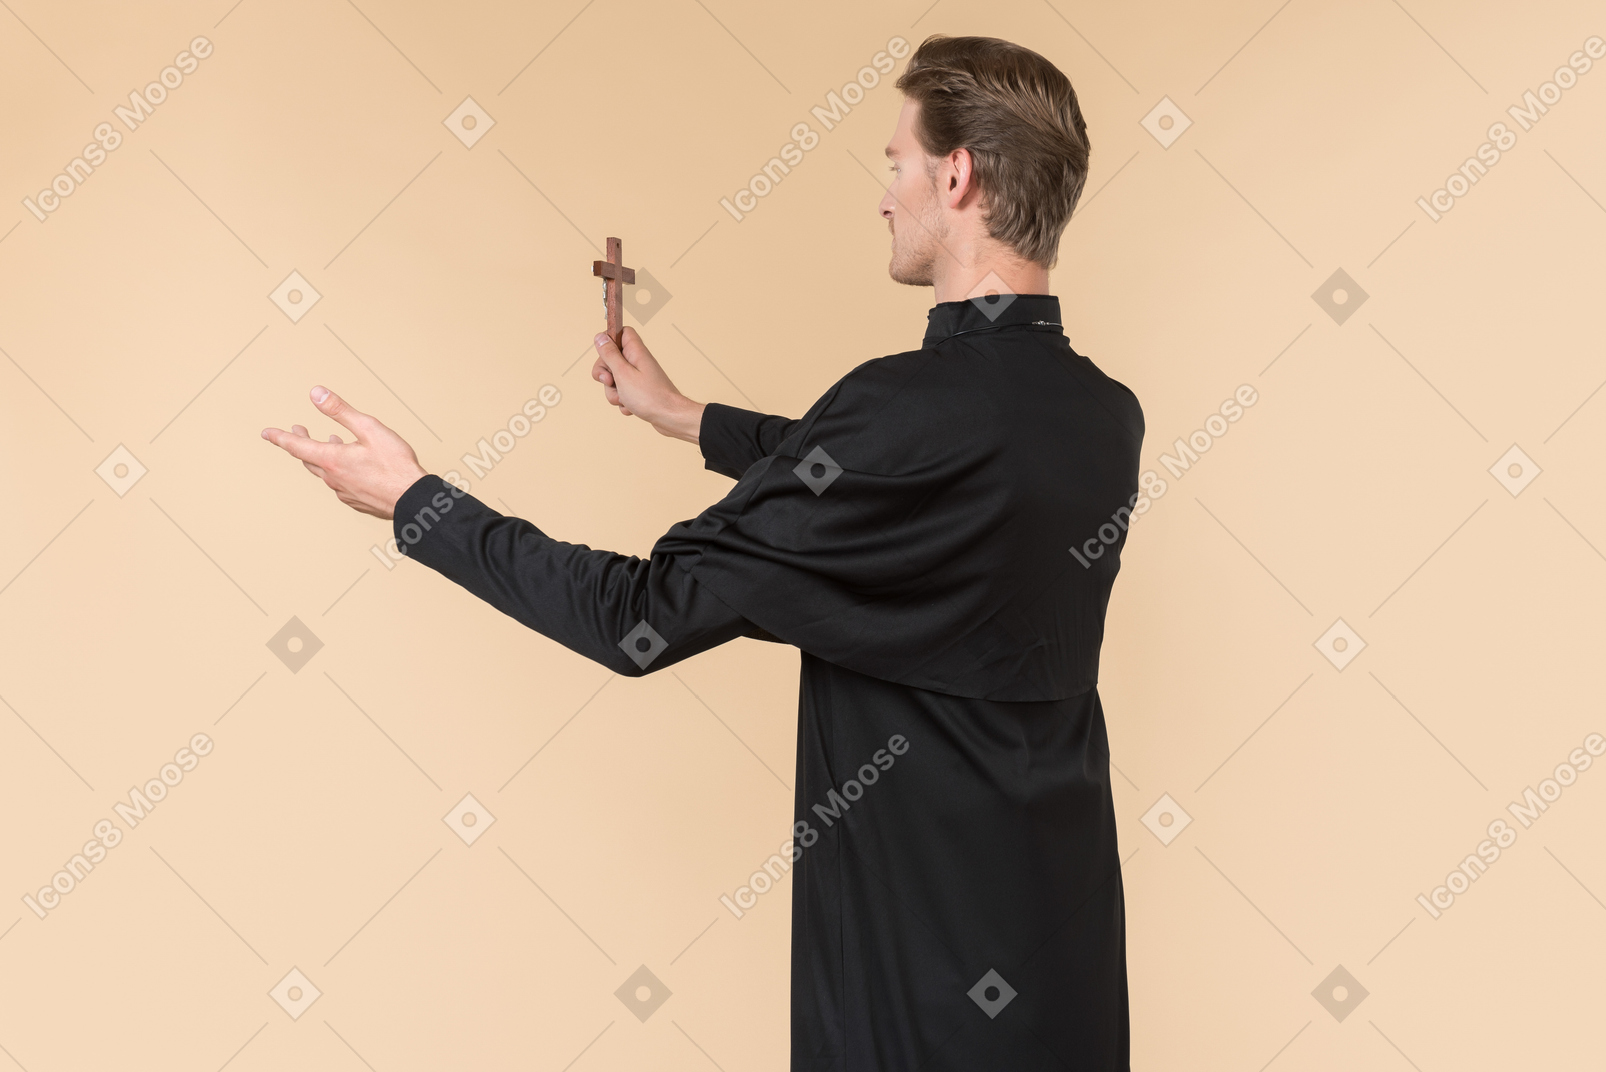 Catholic priest standing half sideways back to camera and holding cross